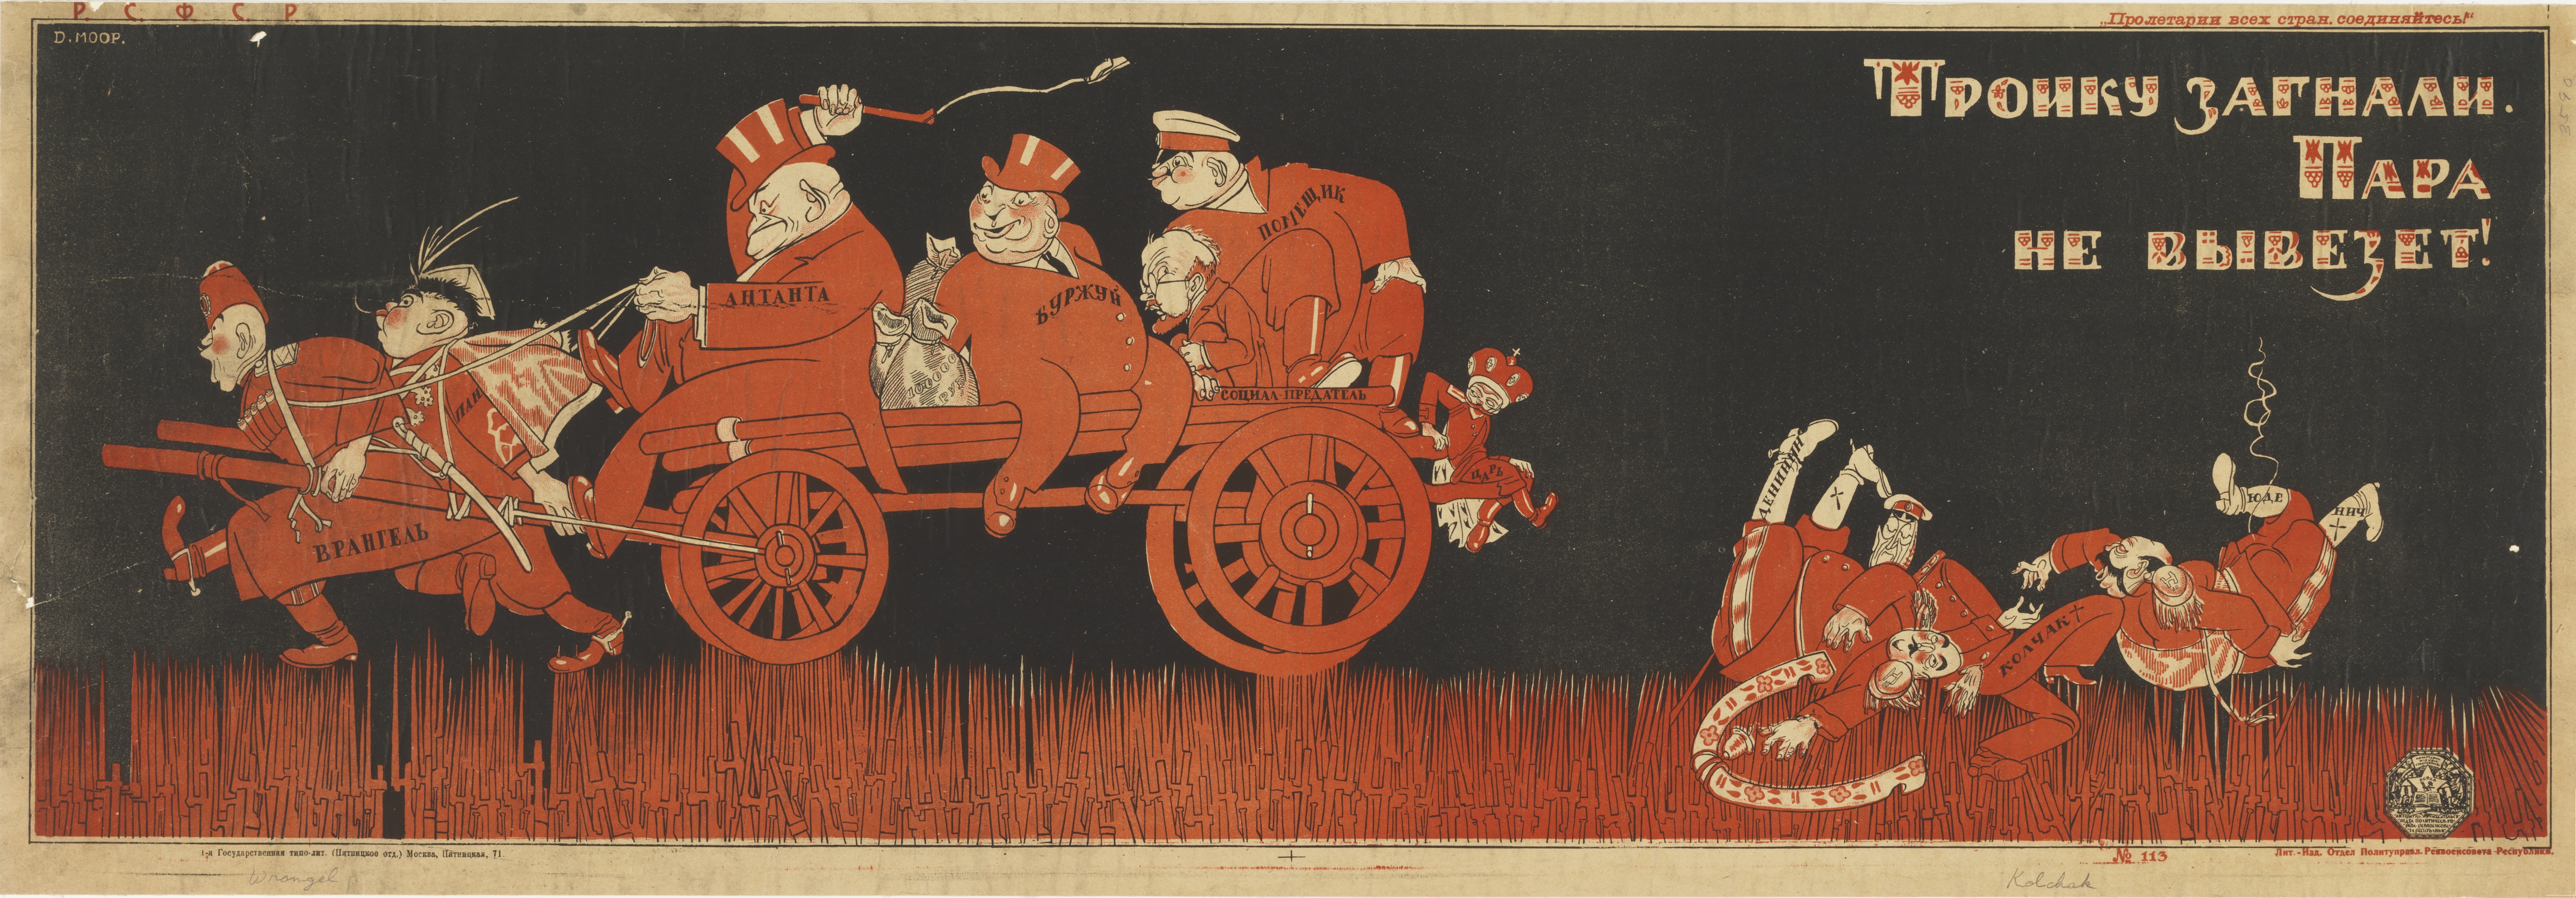 Horizontal red and black poster in which two military leaders pull a cart of symbolic figures across a field. Behind the cart, three figures are sprawled on the ground. Red and white Cyrillic text is printed in the top right.